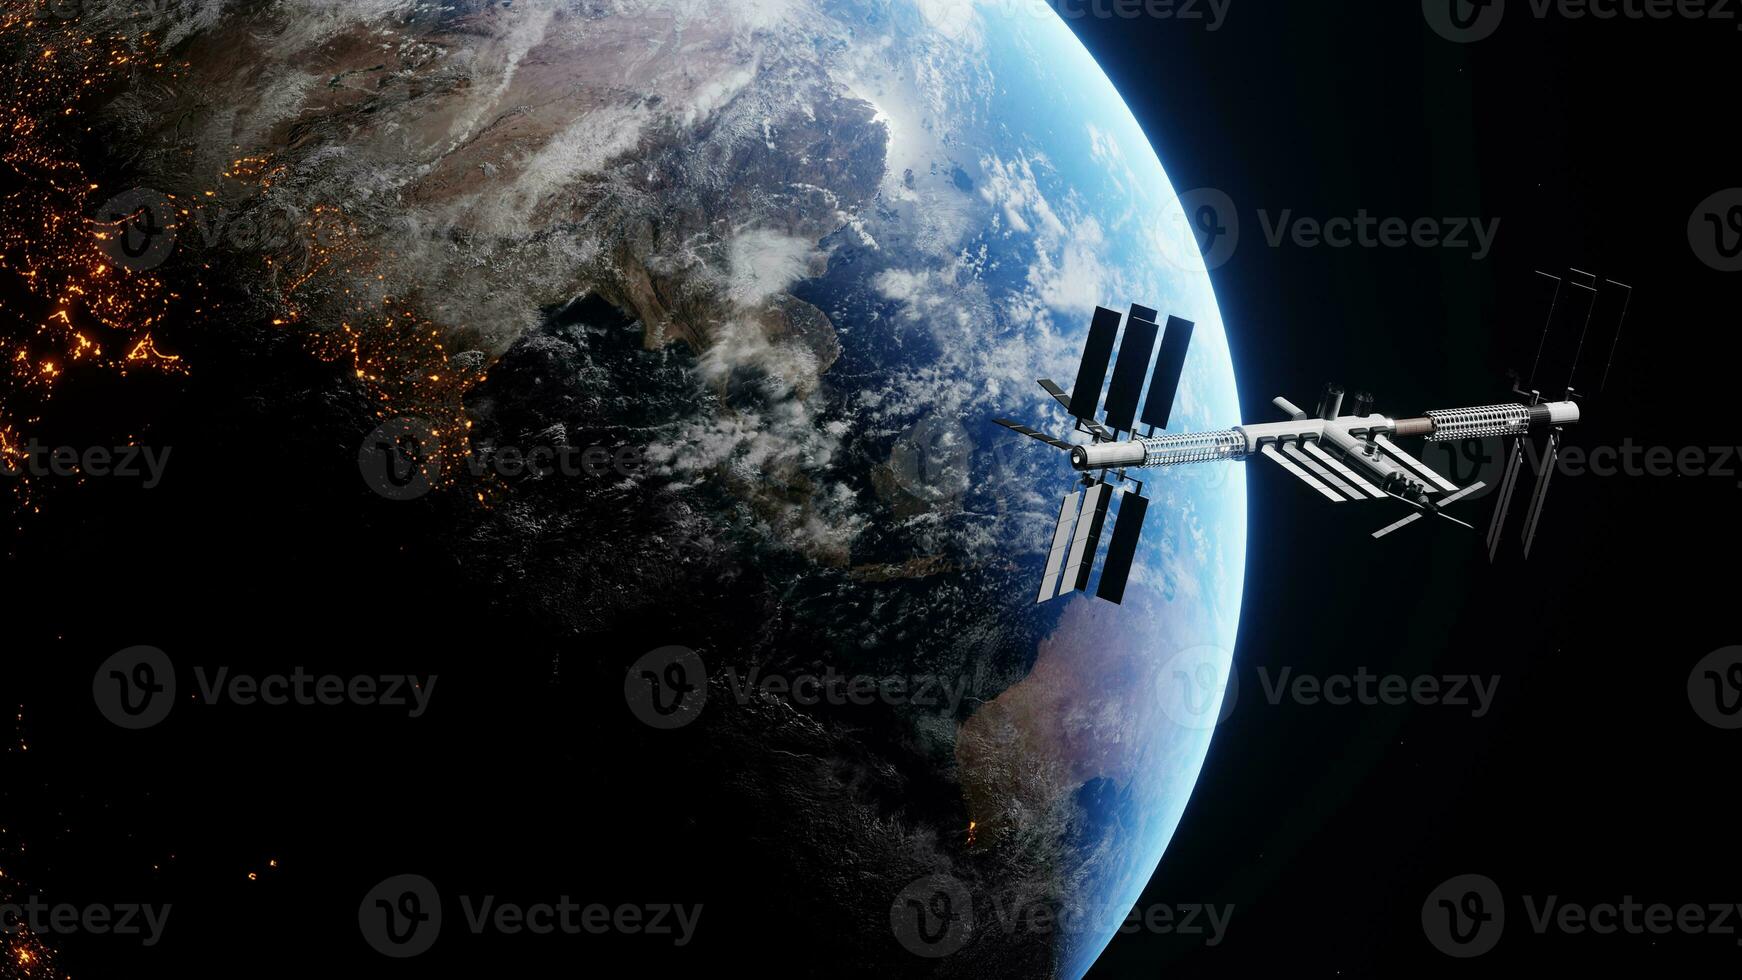 International Space Station flighting above the light of the planet. Orbiting spaceship in the univers, shuttle into atmosphere. Images from NASA. Rendered 3D illustration photo